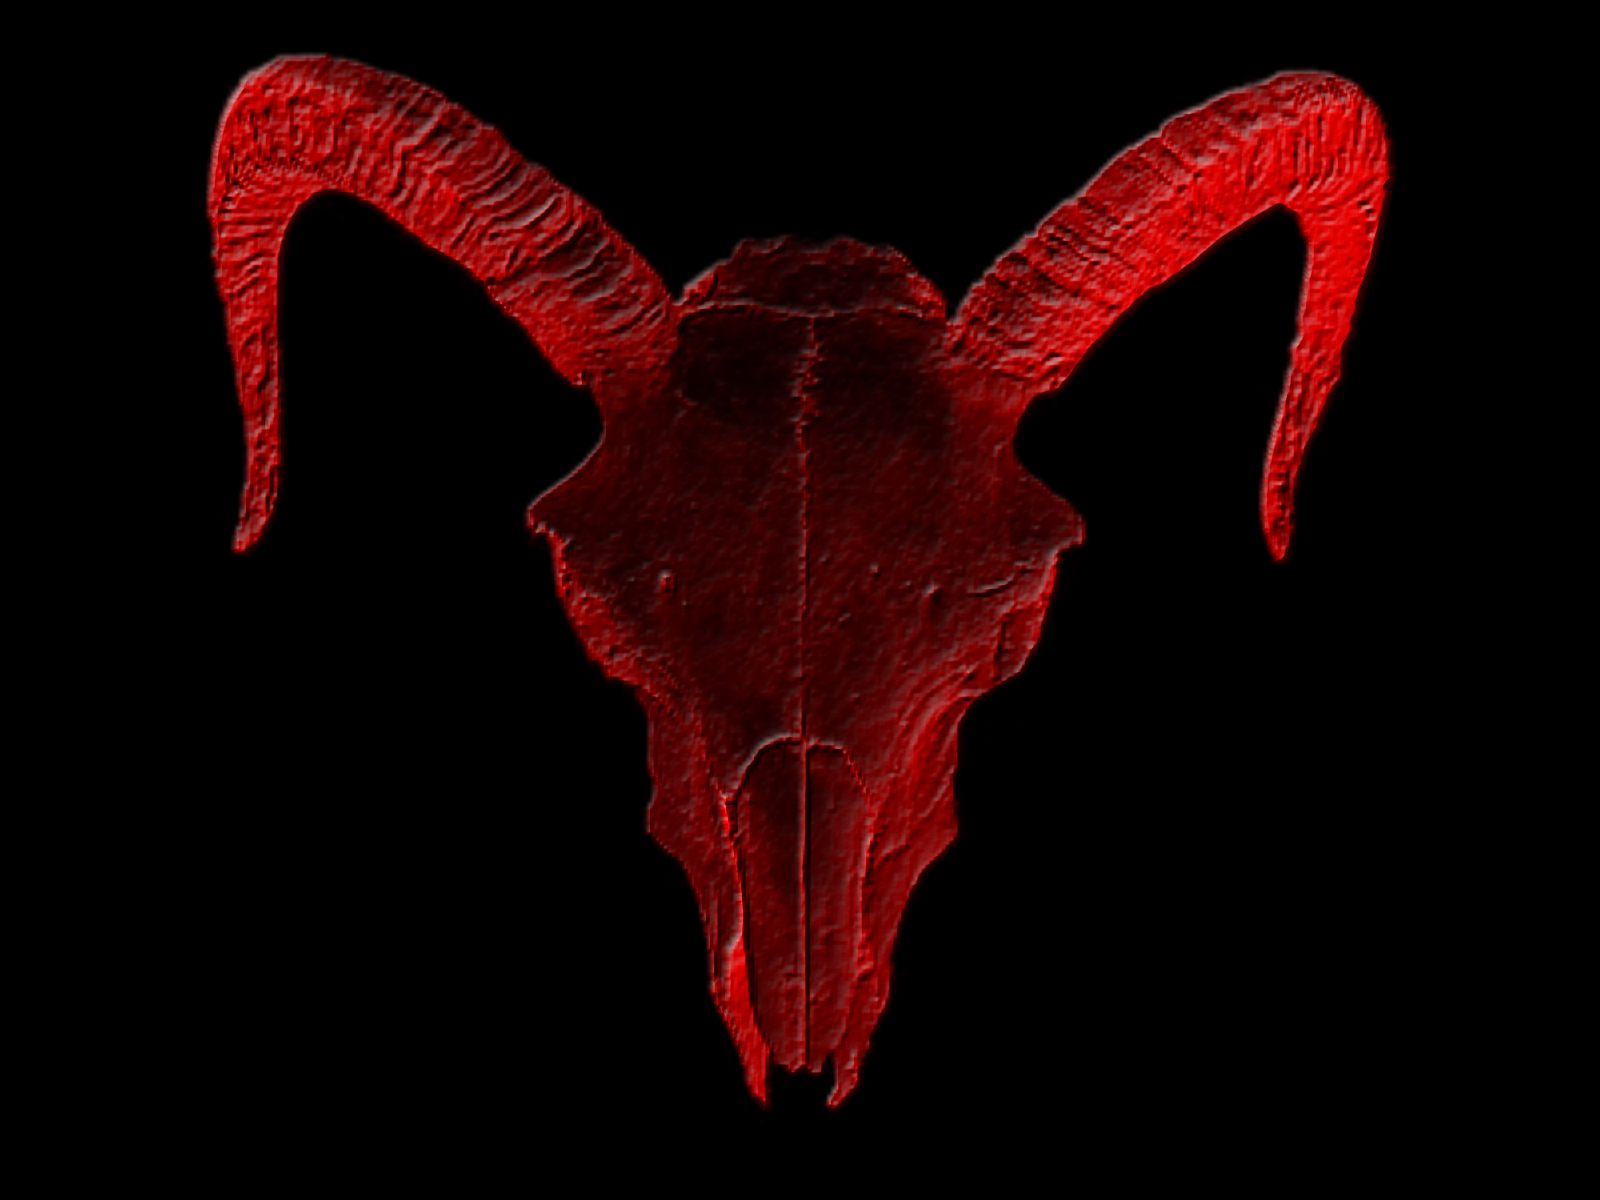 Wallpaper 14 Sheep Skull Red and Black Wallpapers